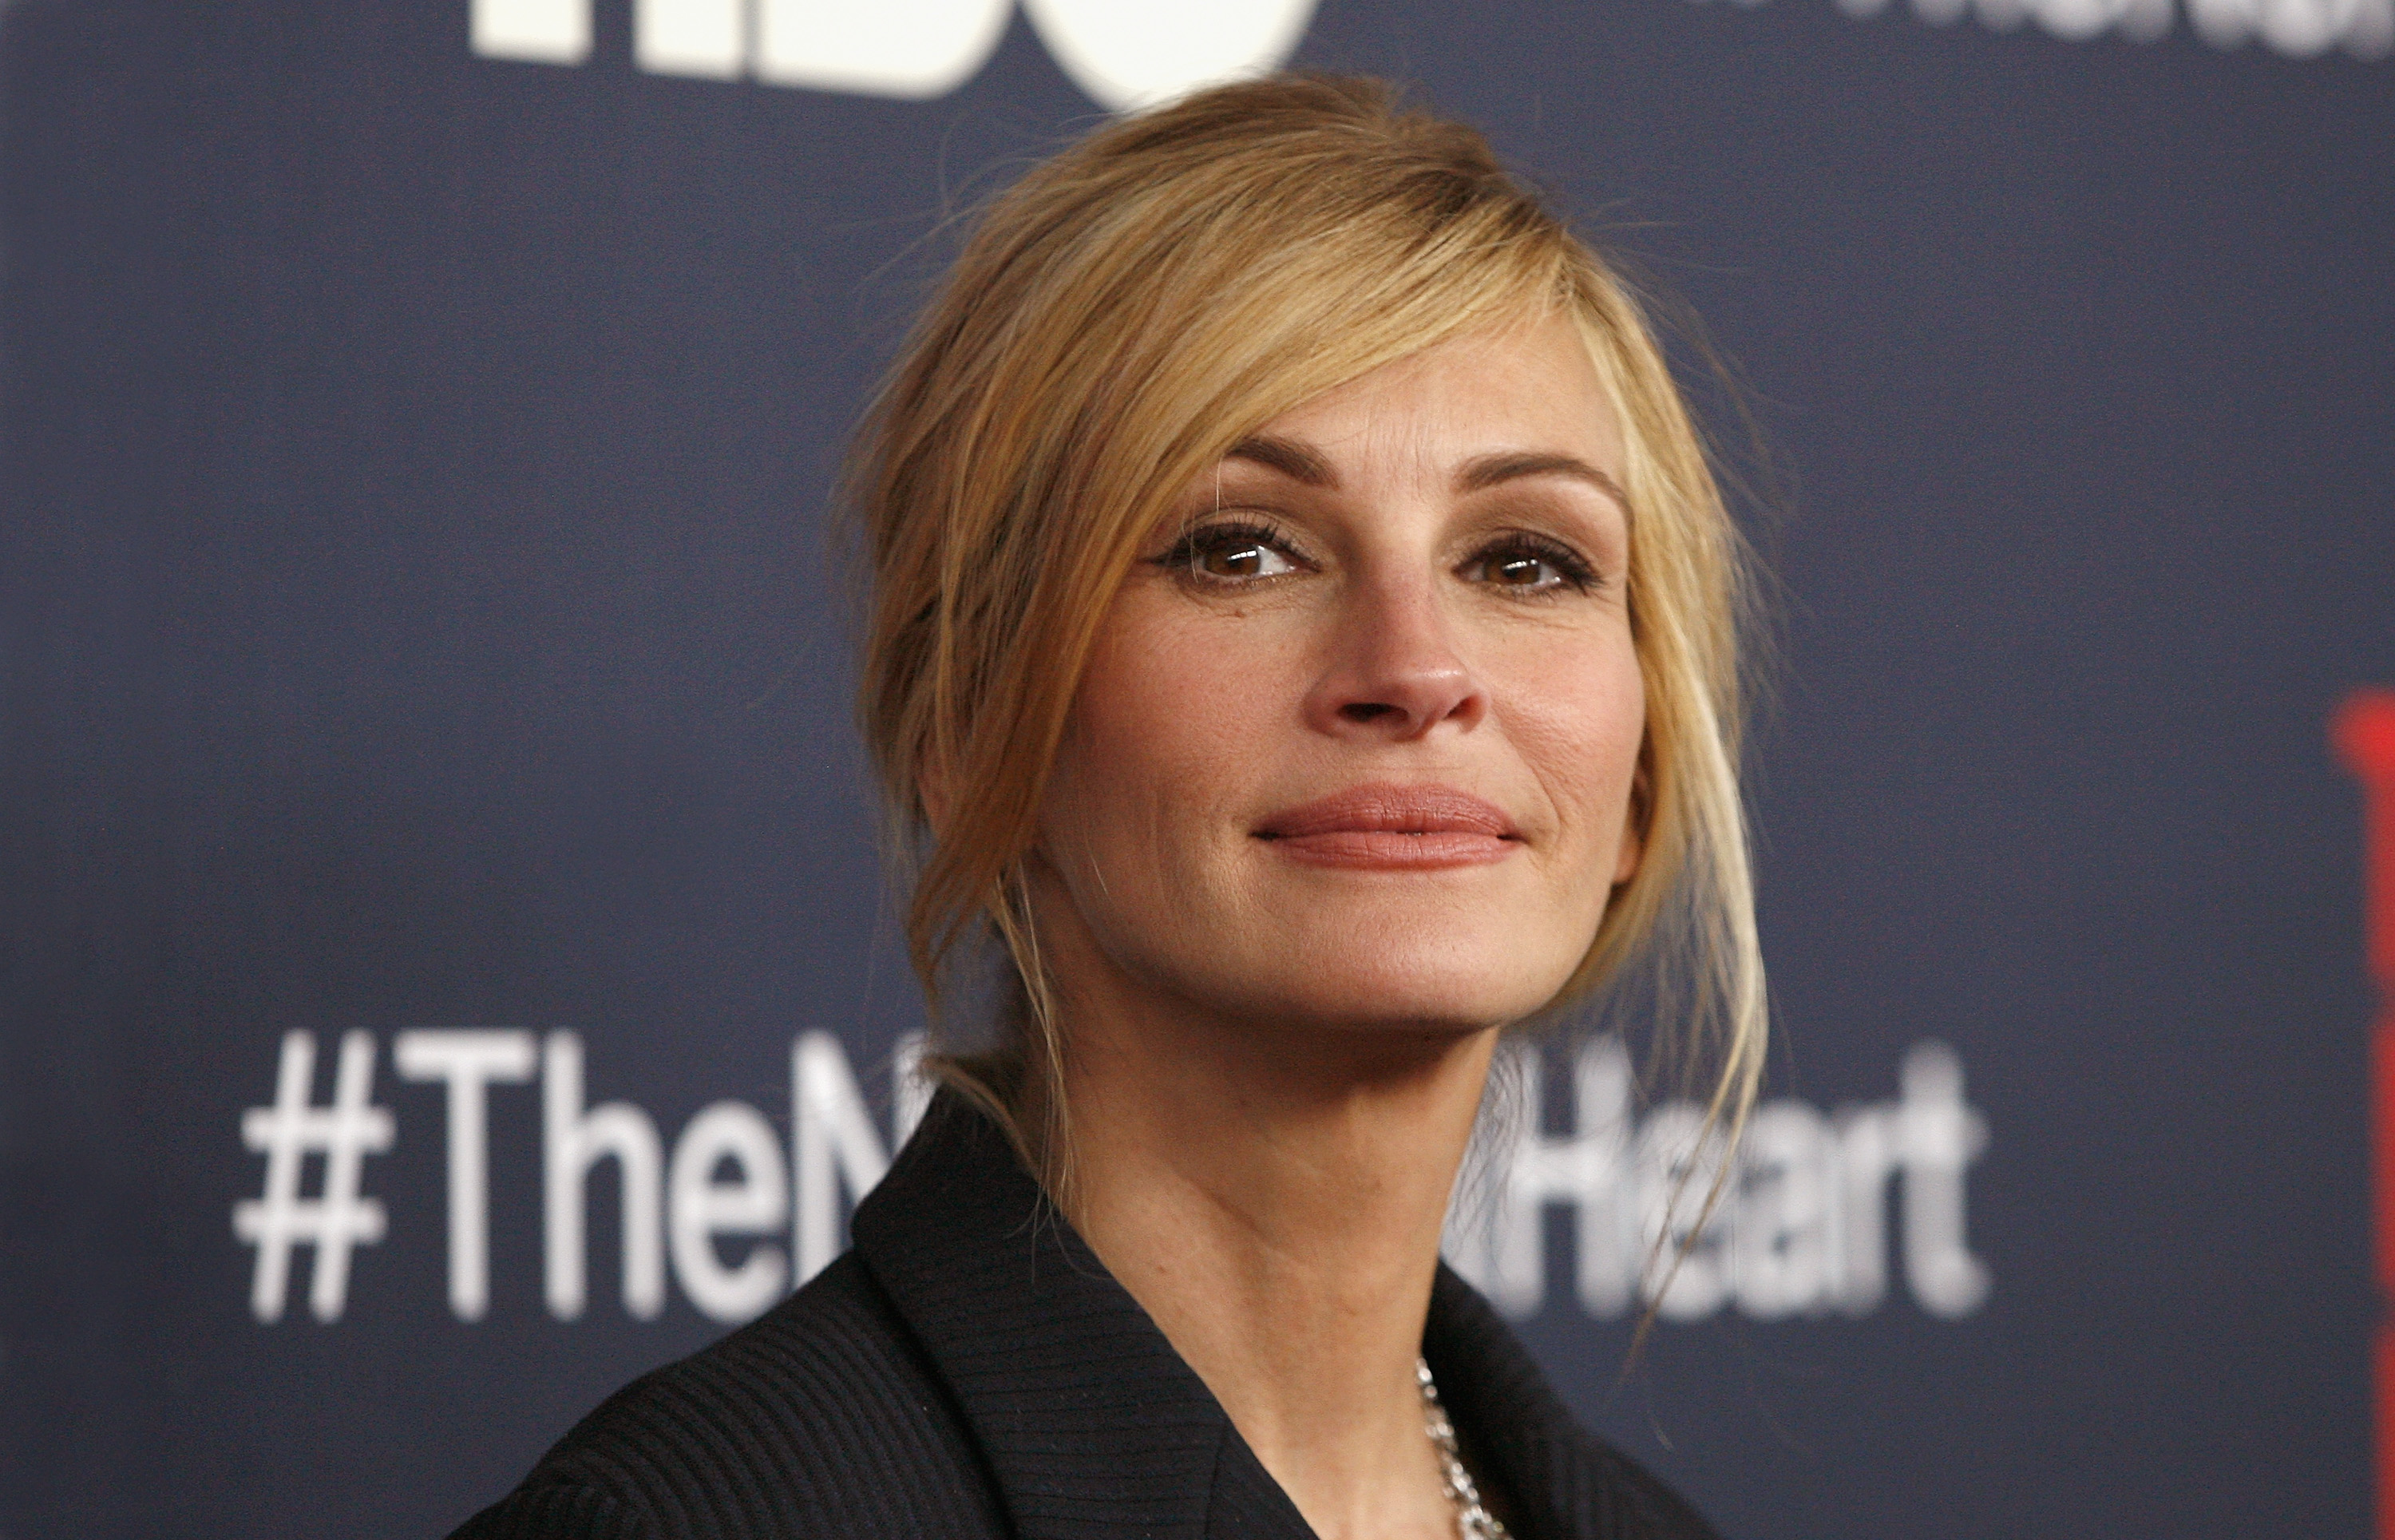 Actress Julia Roberts attends "The Normal Heart" New York Screening at Ziegfeld Theater on May 12, 2014 in New York City. (Jim Spellman—WireImage)